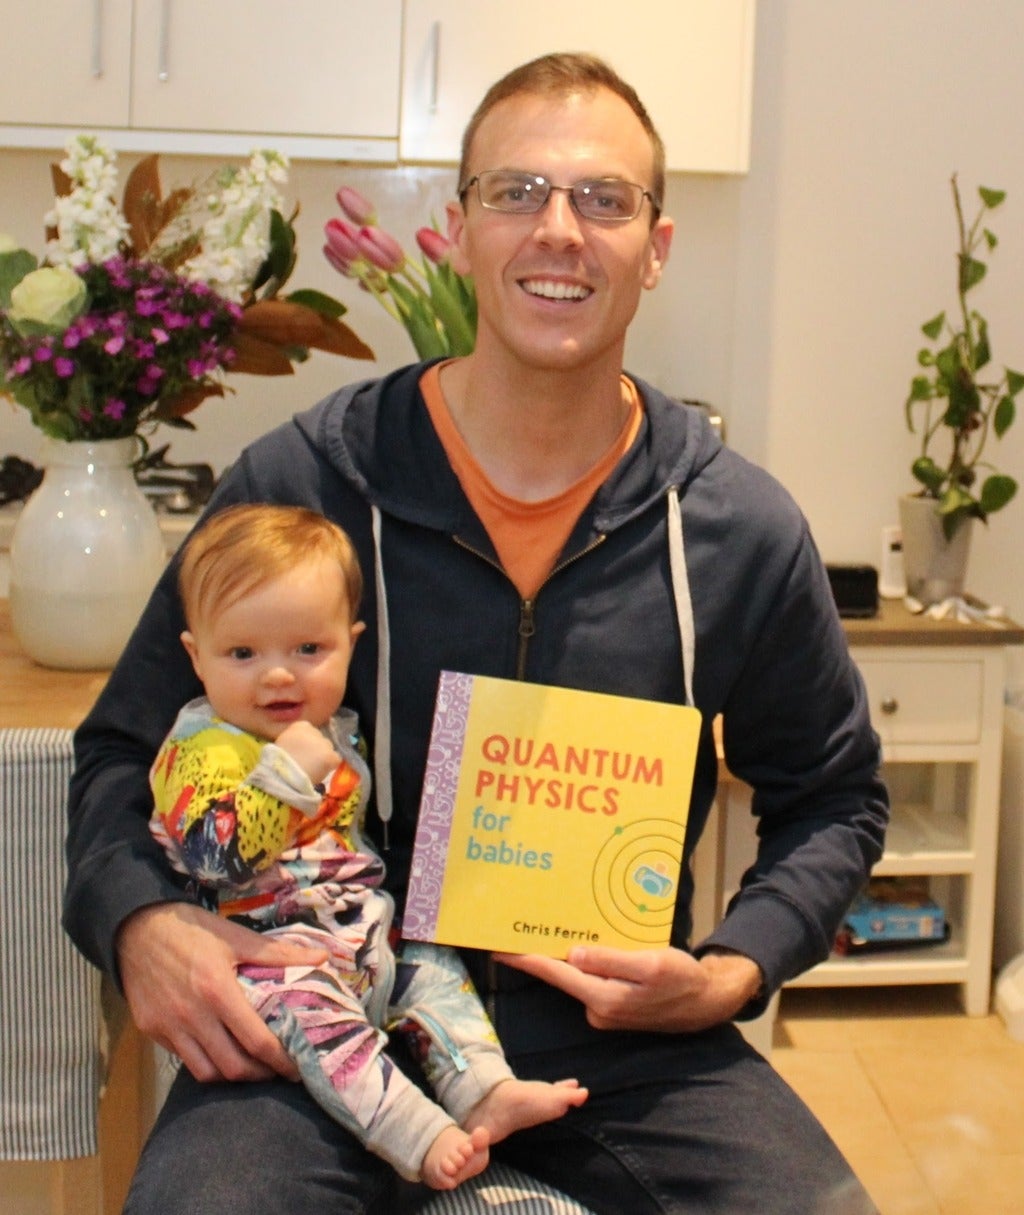 Chris with his baby and the 'Quantum Physics for Babies' book